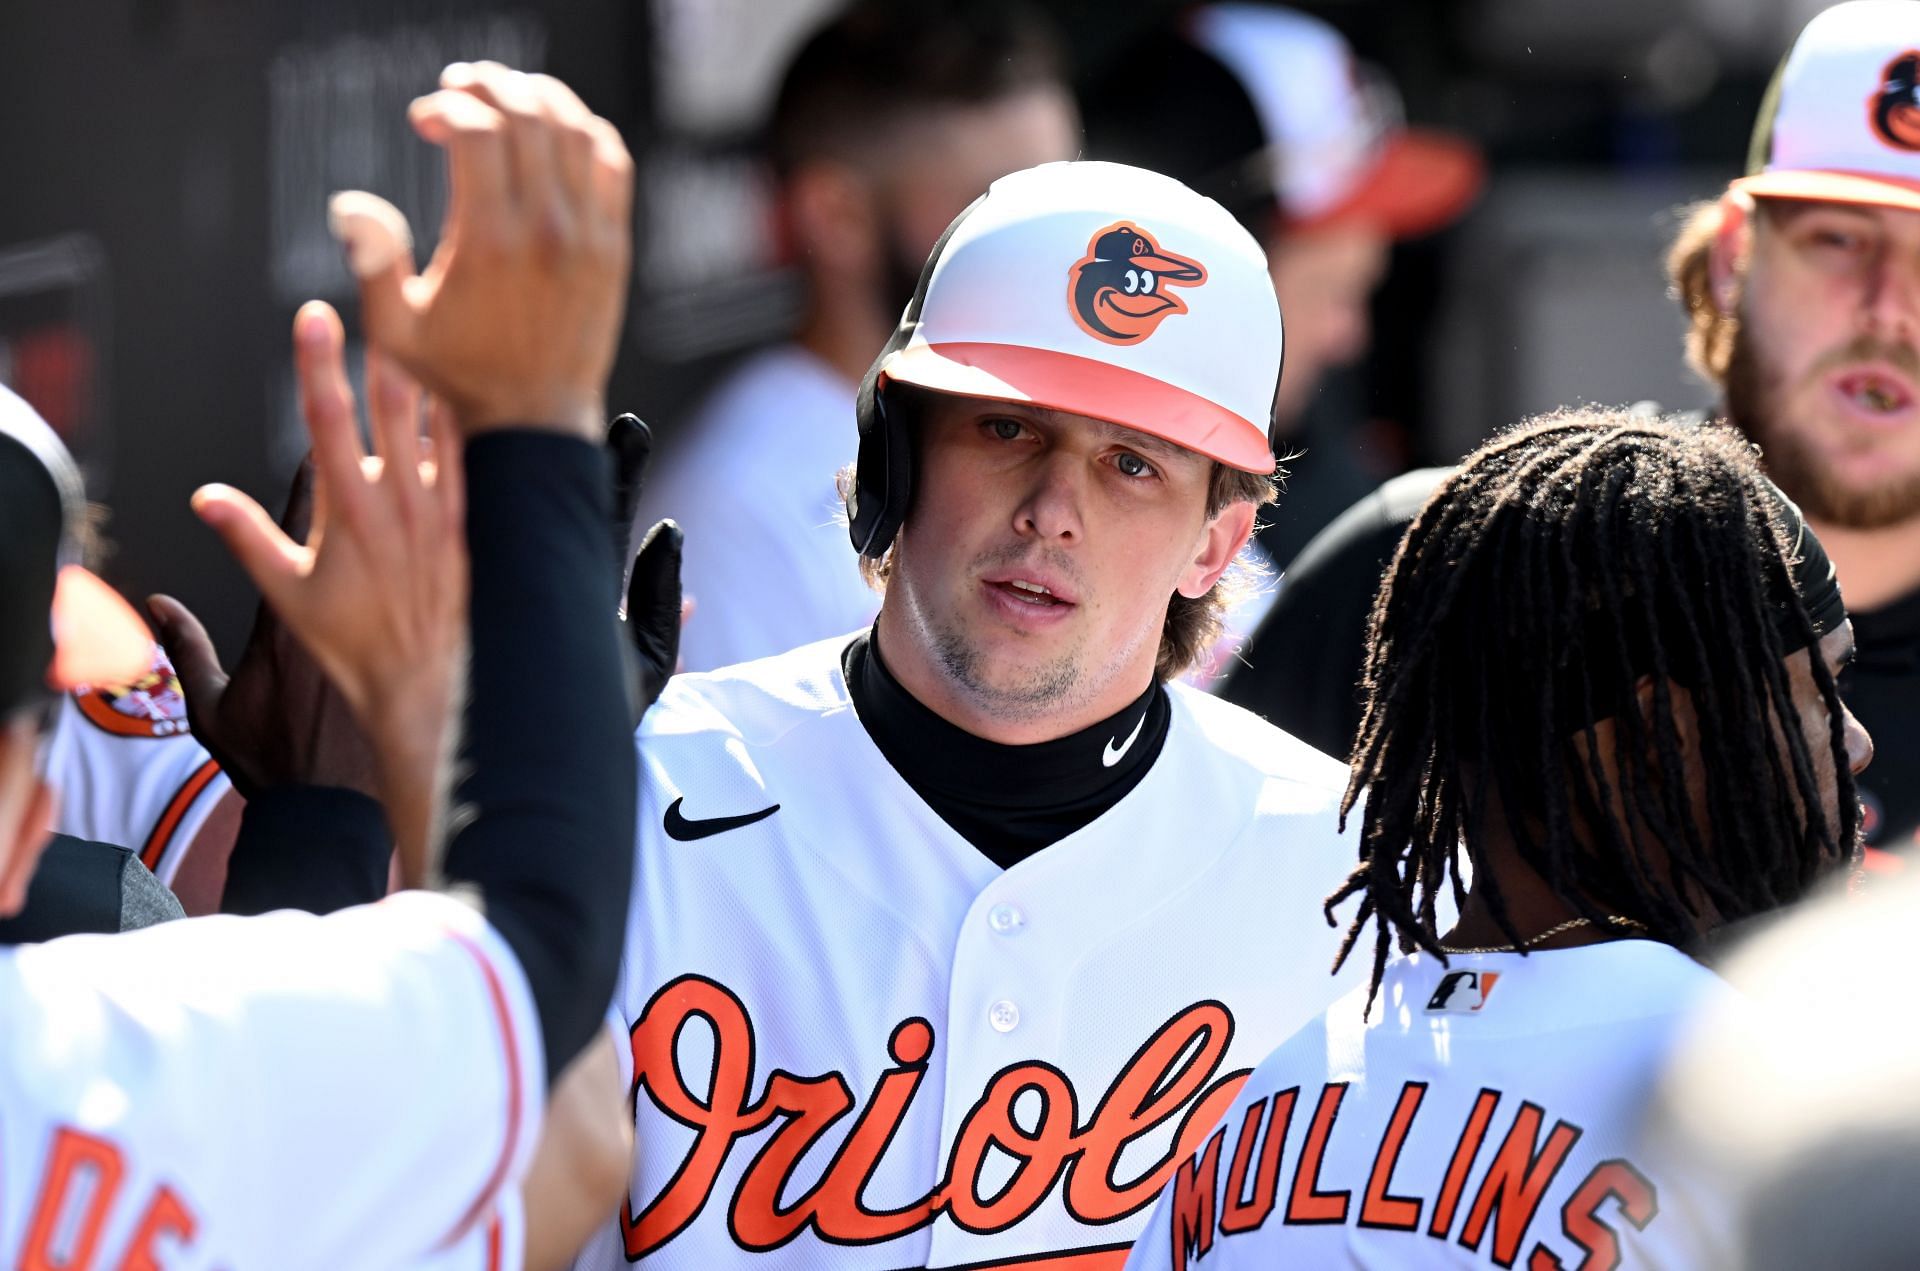 Adley Rutschman of the Baltimore Orioles celebrates with teammates after hitting a home run.